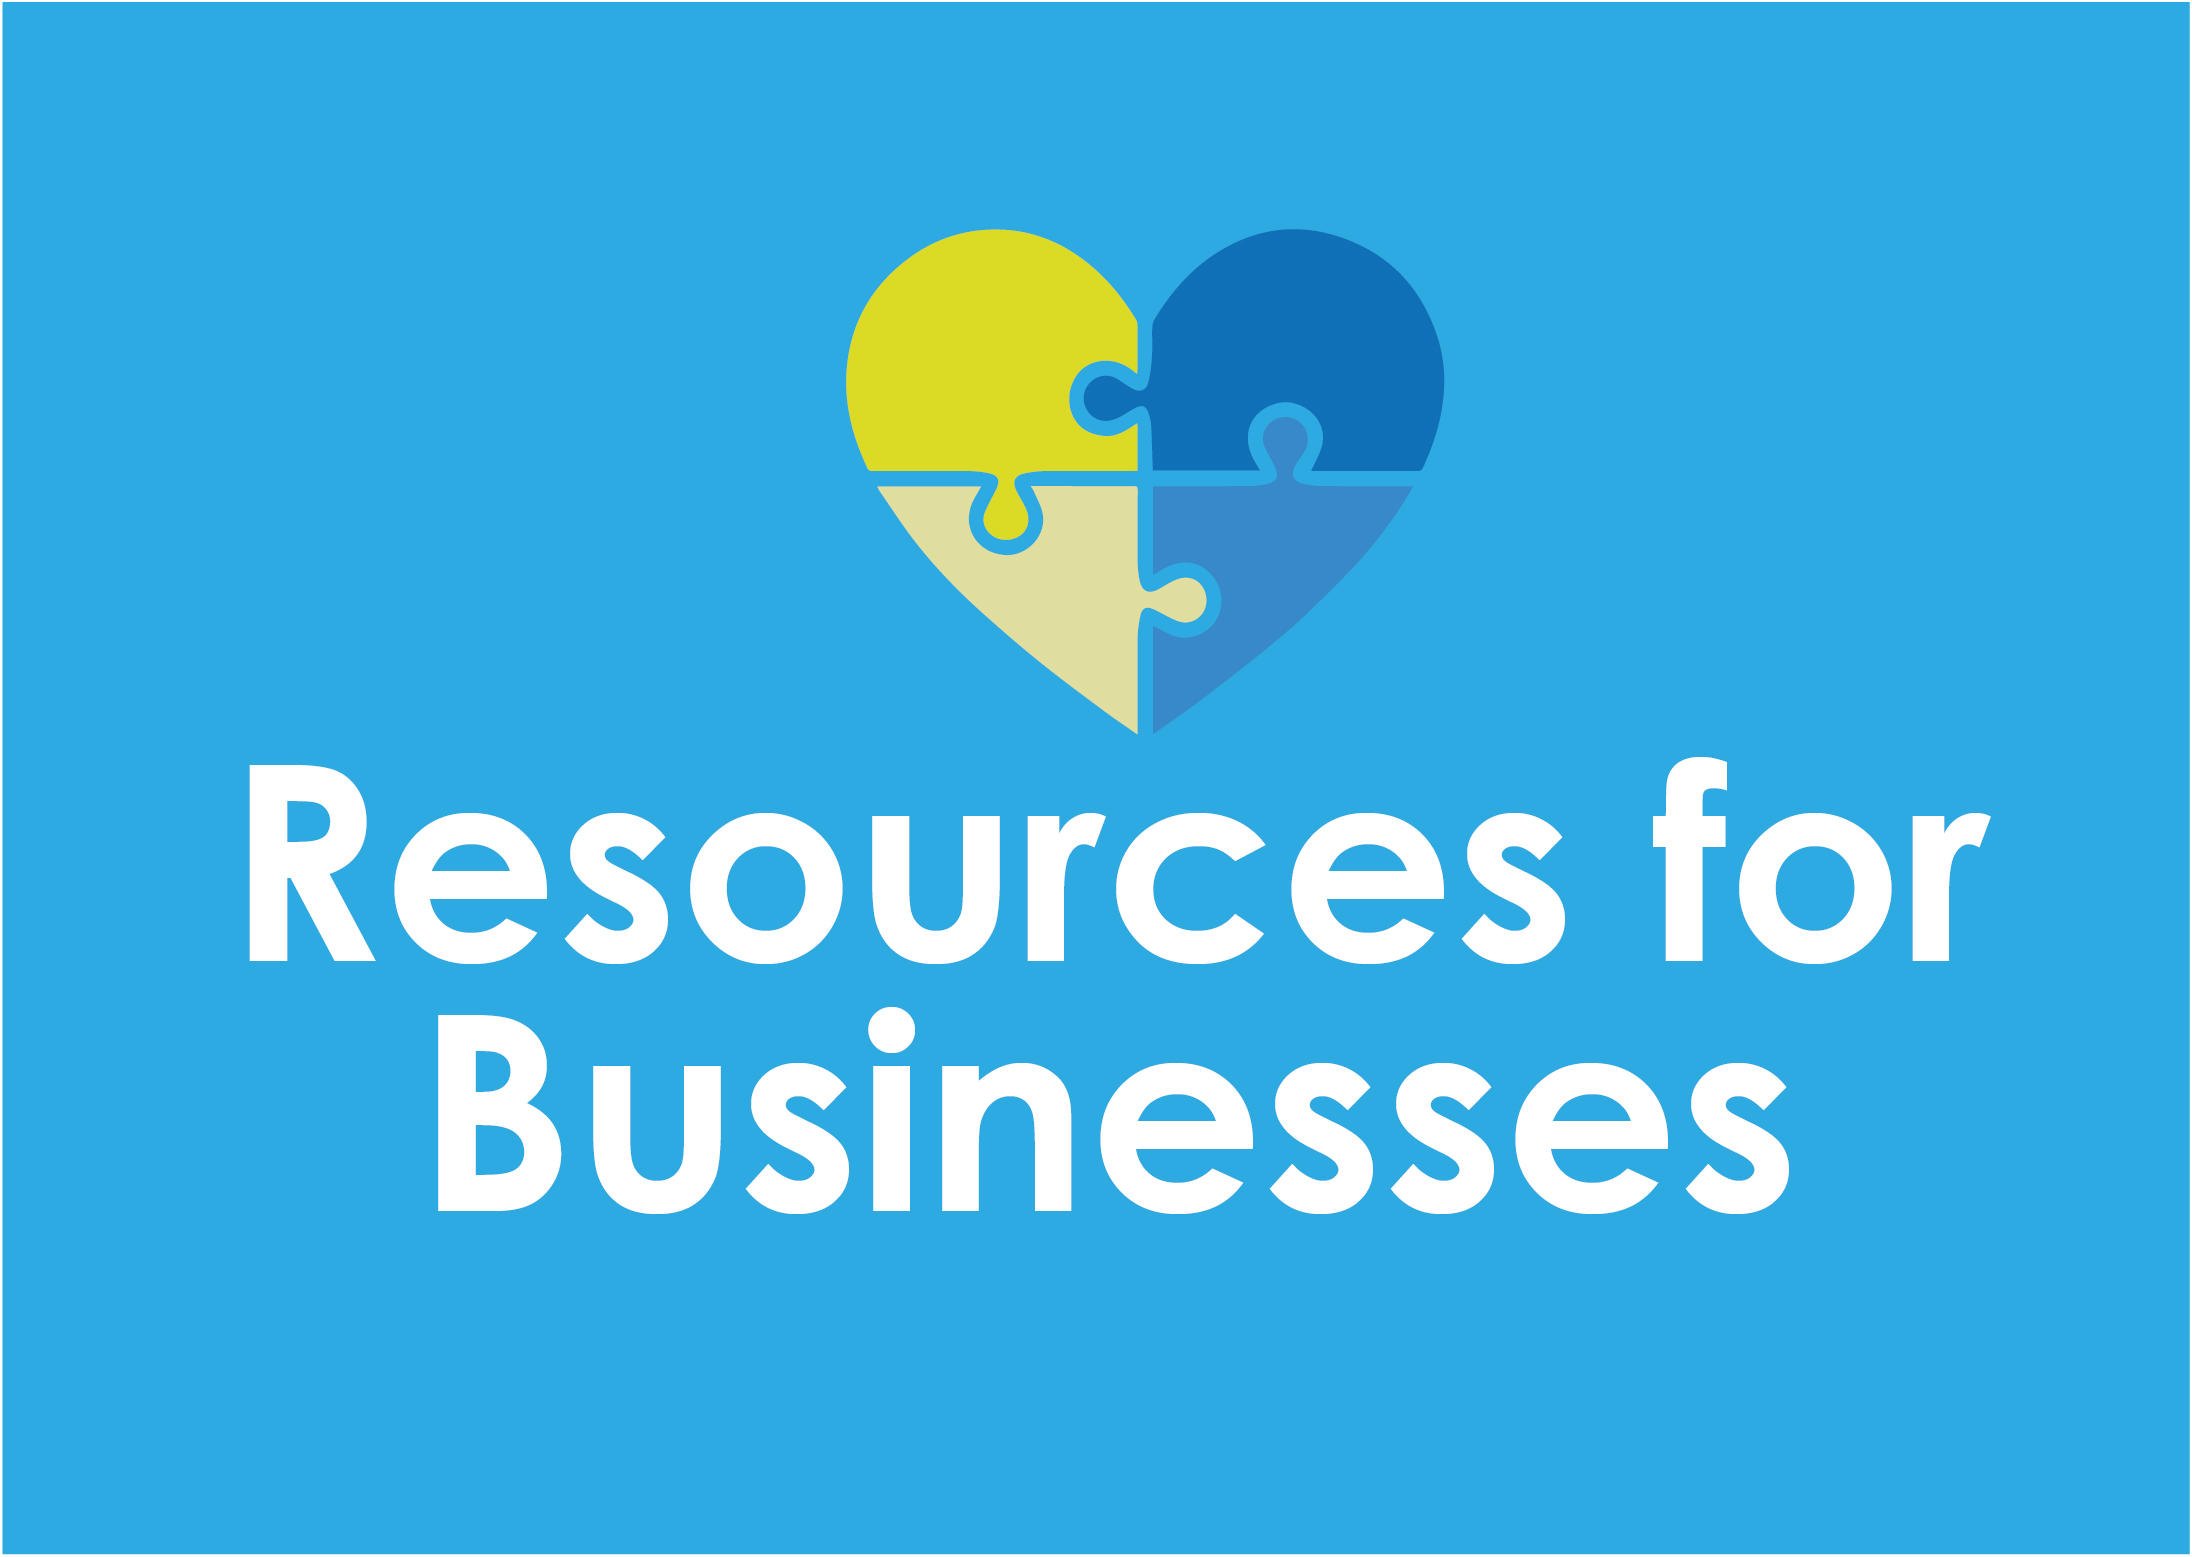 Resources for Businesses